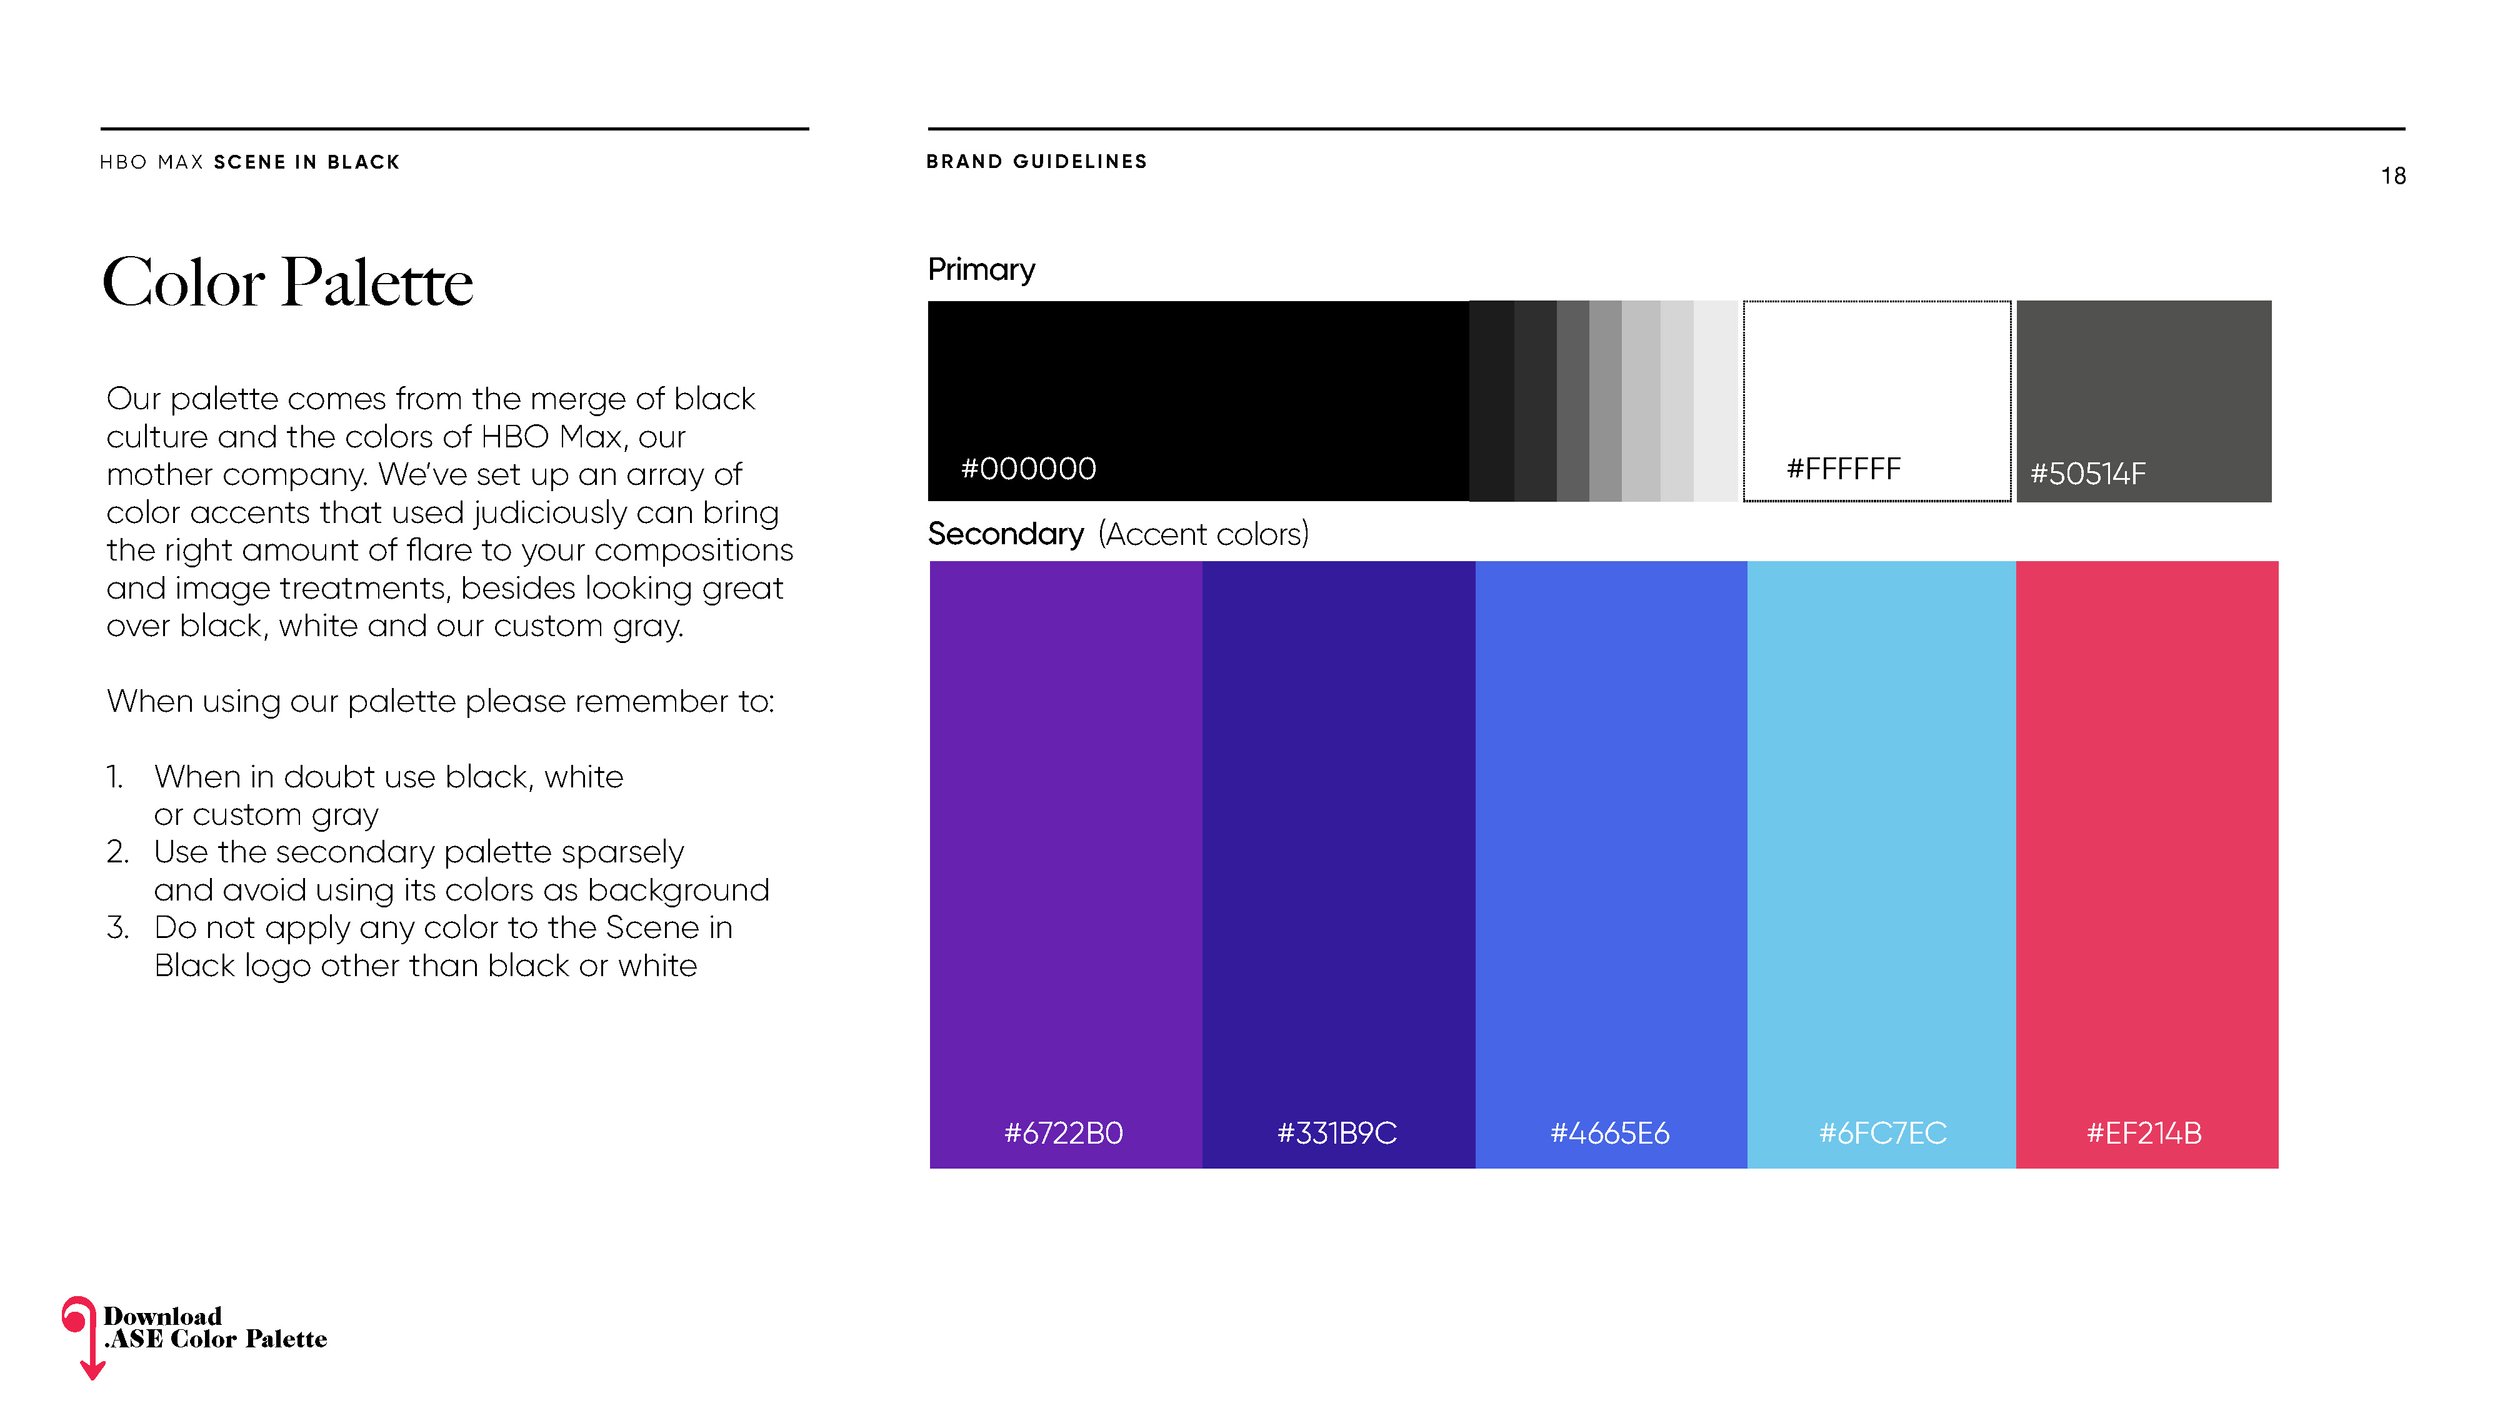 HBOMax_SceneinBlack | Brand Guidelines | Final Oct21_Page_18.jpg